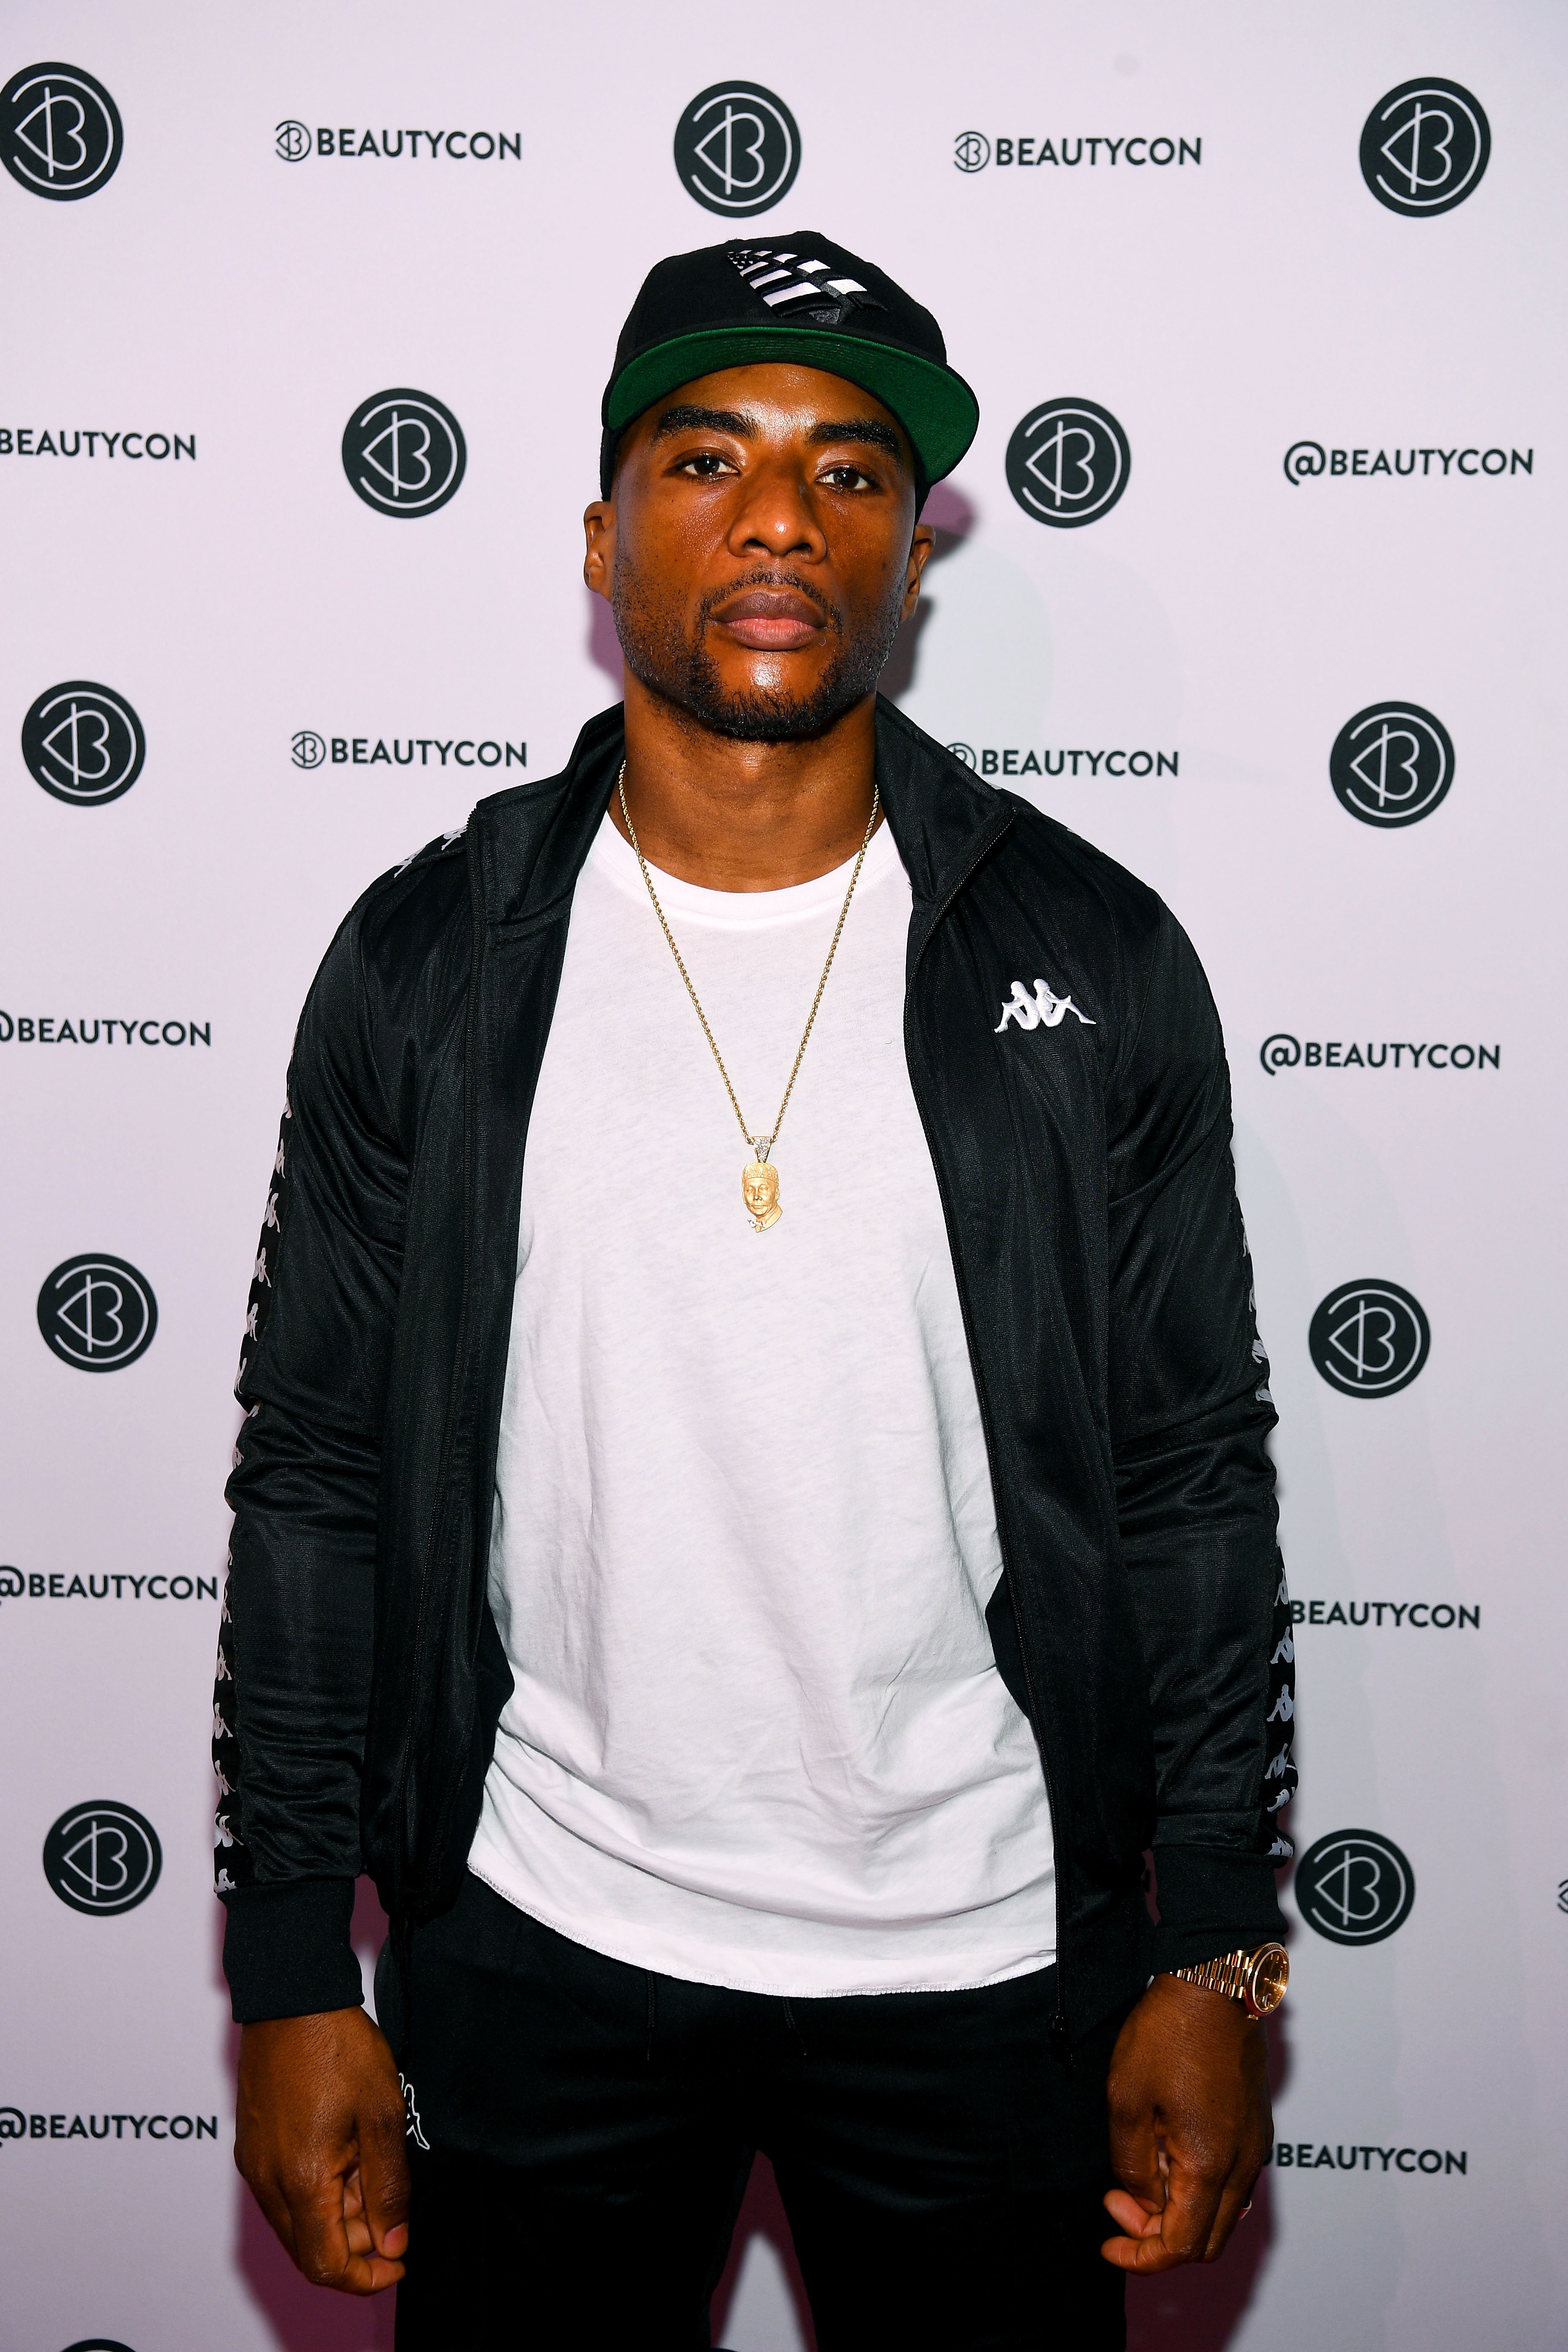 Charlamagne Tha God poses backstage at Beautycon Festival New York 2019 on April 07, 2019 in New York City | Photo: Getty Images